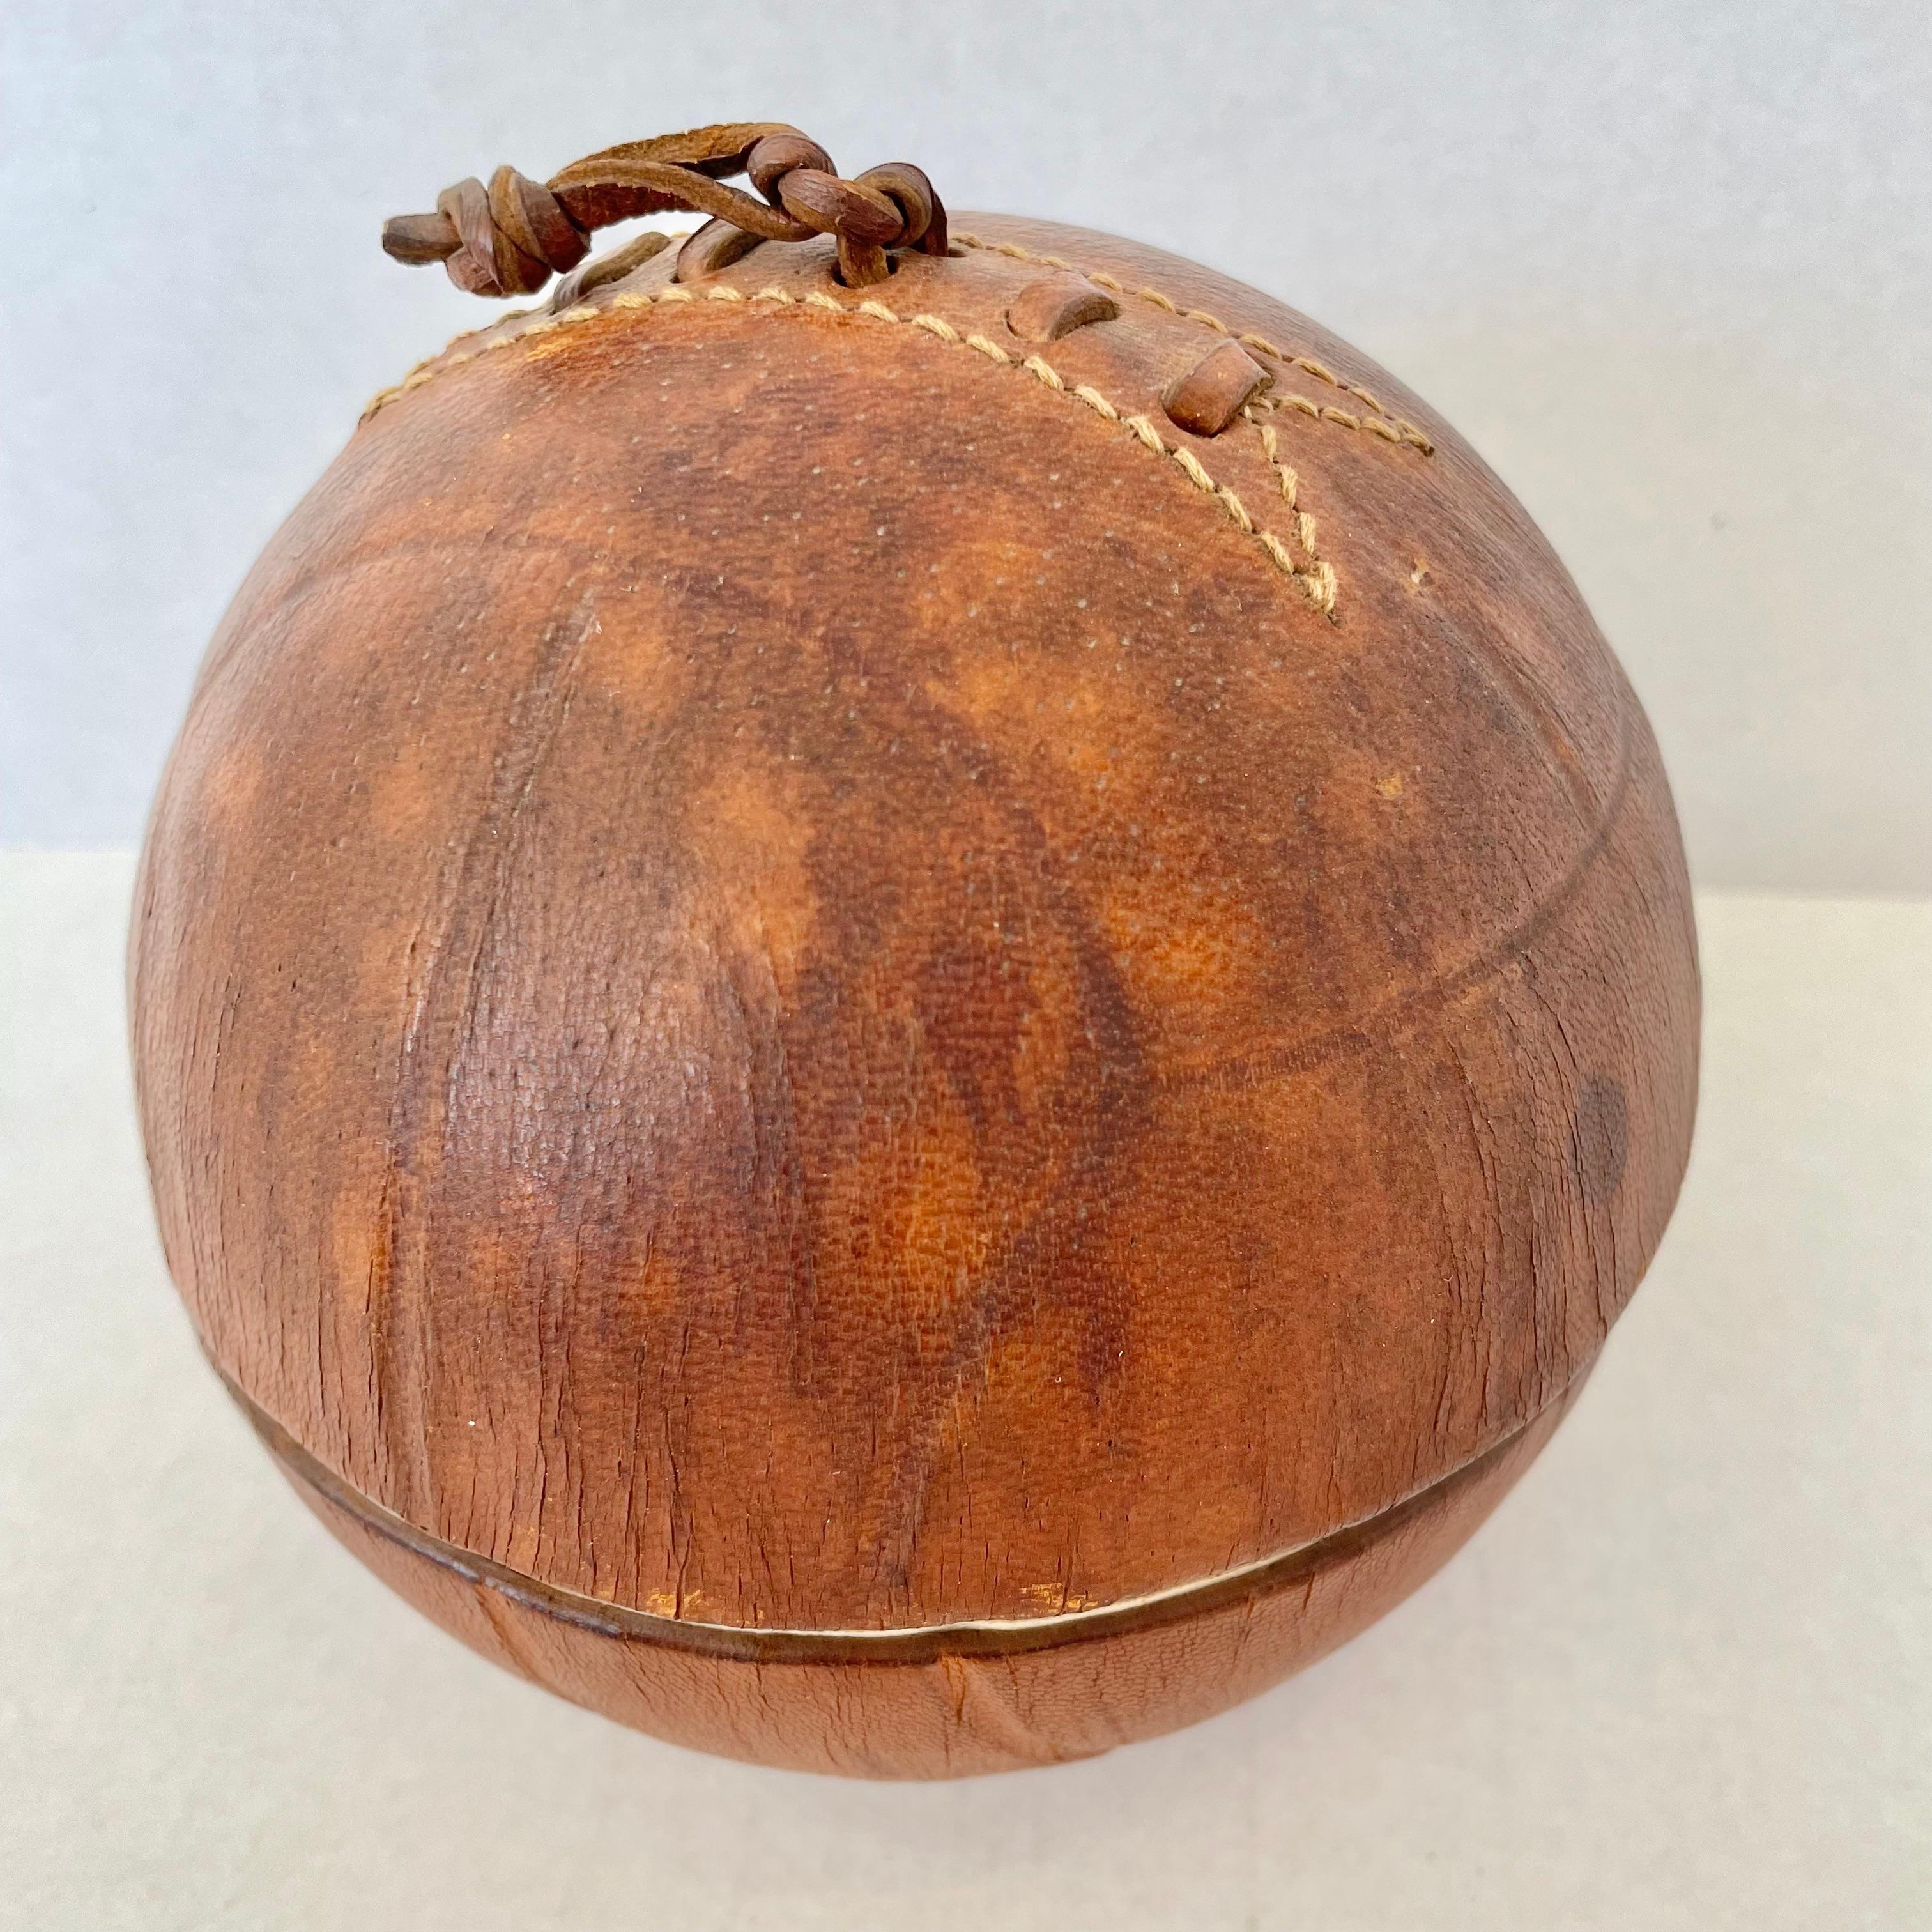 Handsome leather and ceramic ashtray/catchall by Longchamp in the design of an old soccer ball. Stamped with Lonchamp - France and logo. Beautiful patina to brown leather. Opens up to reveal the ashtray and another compartment that could be used as